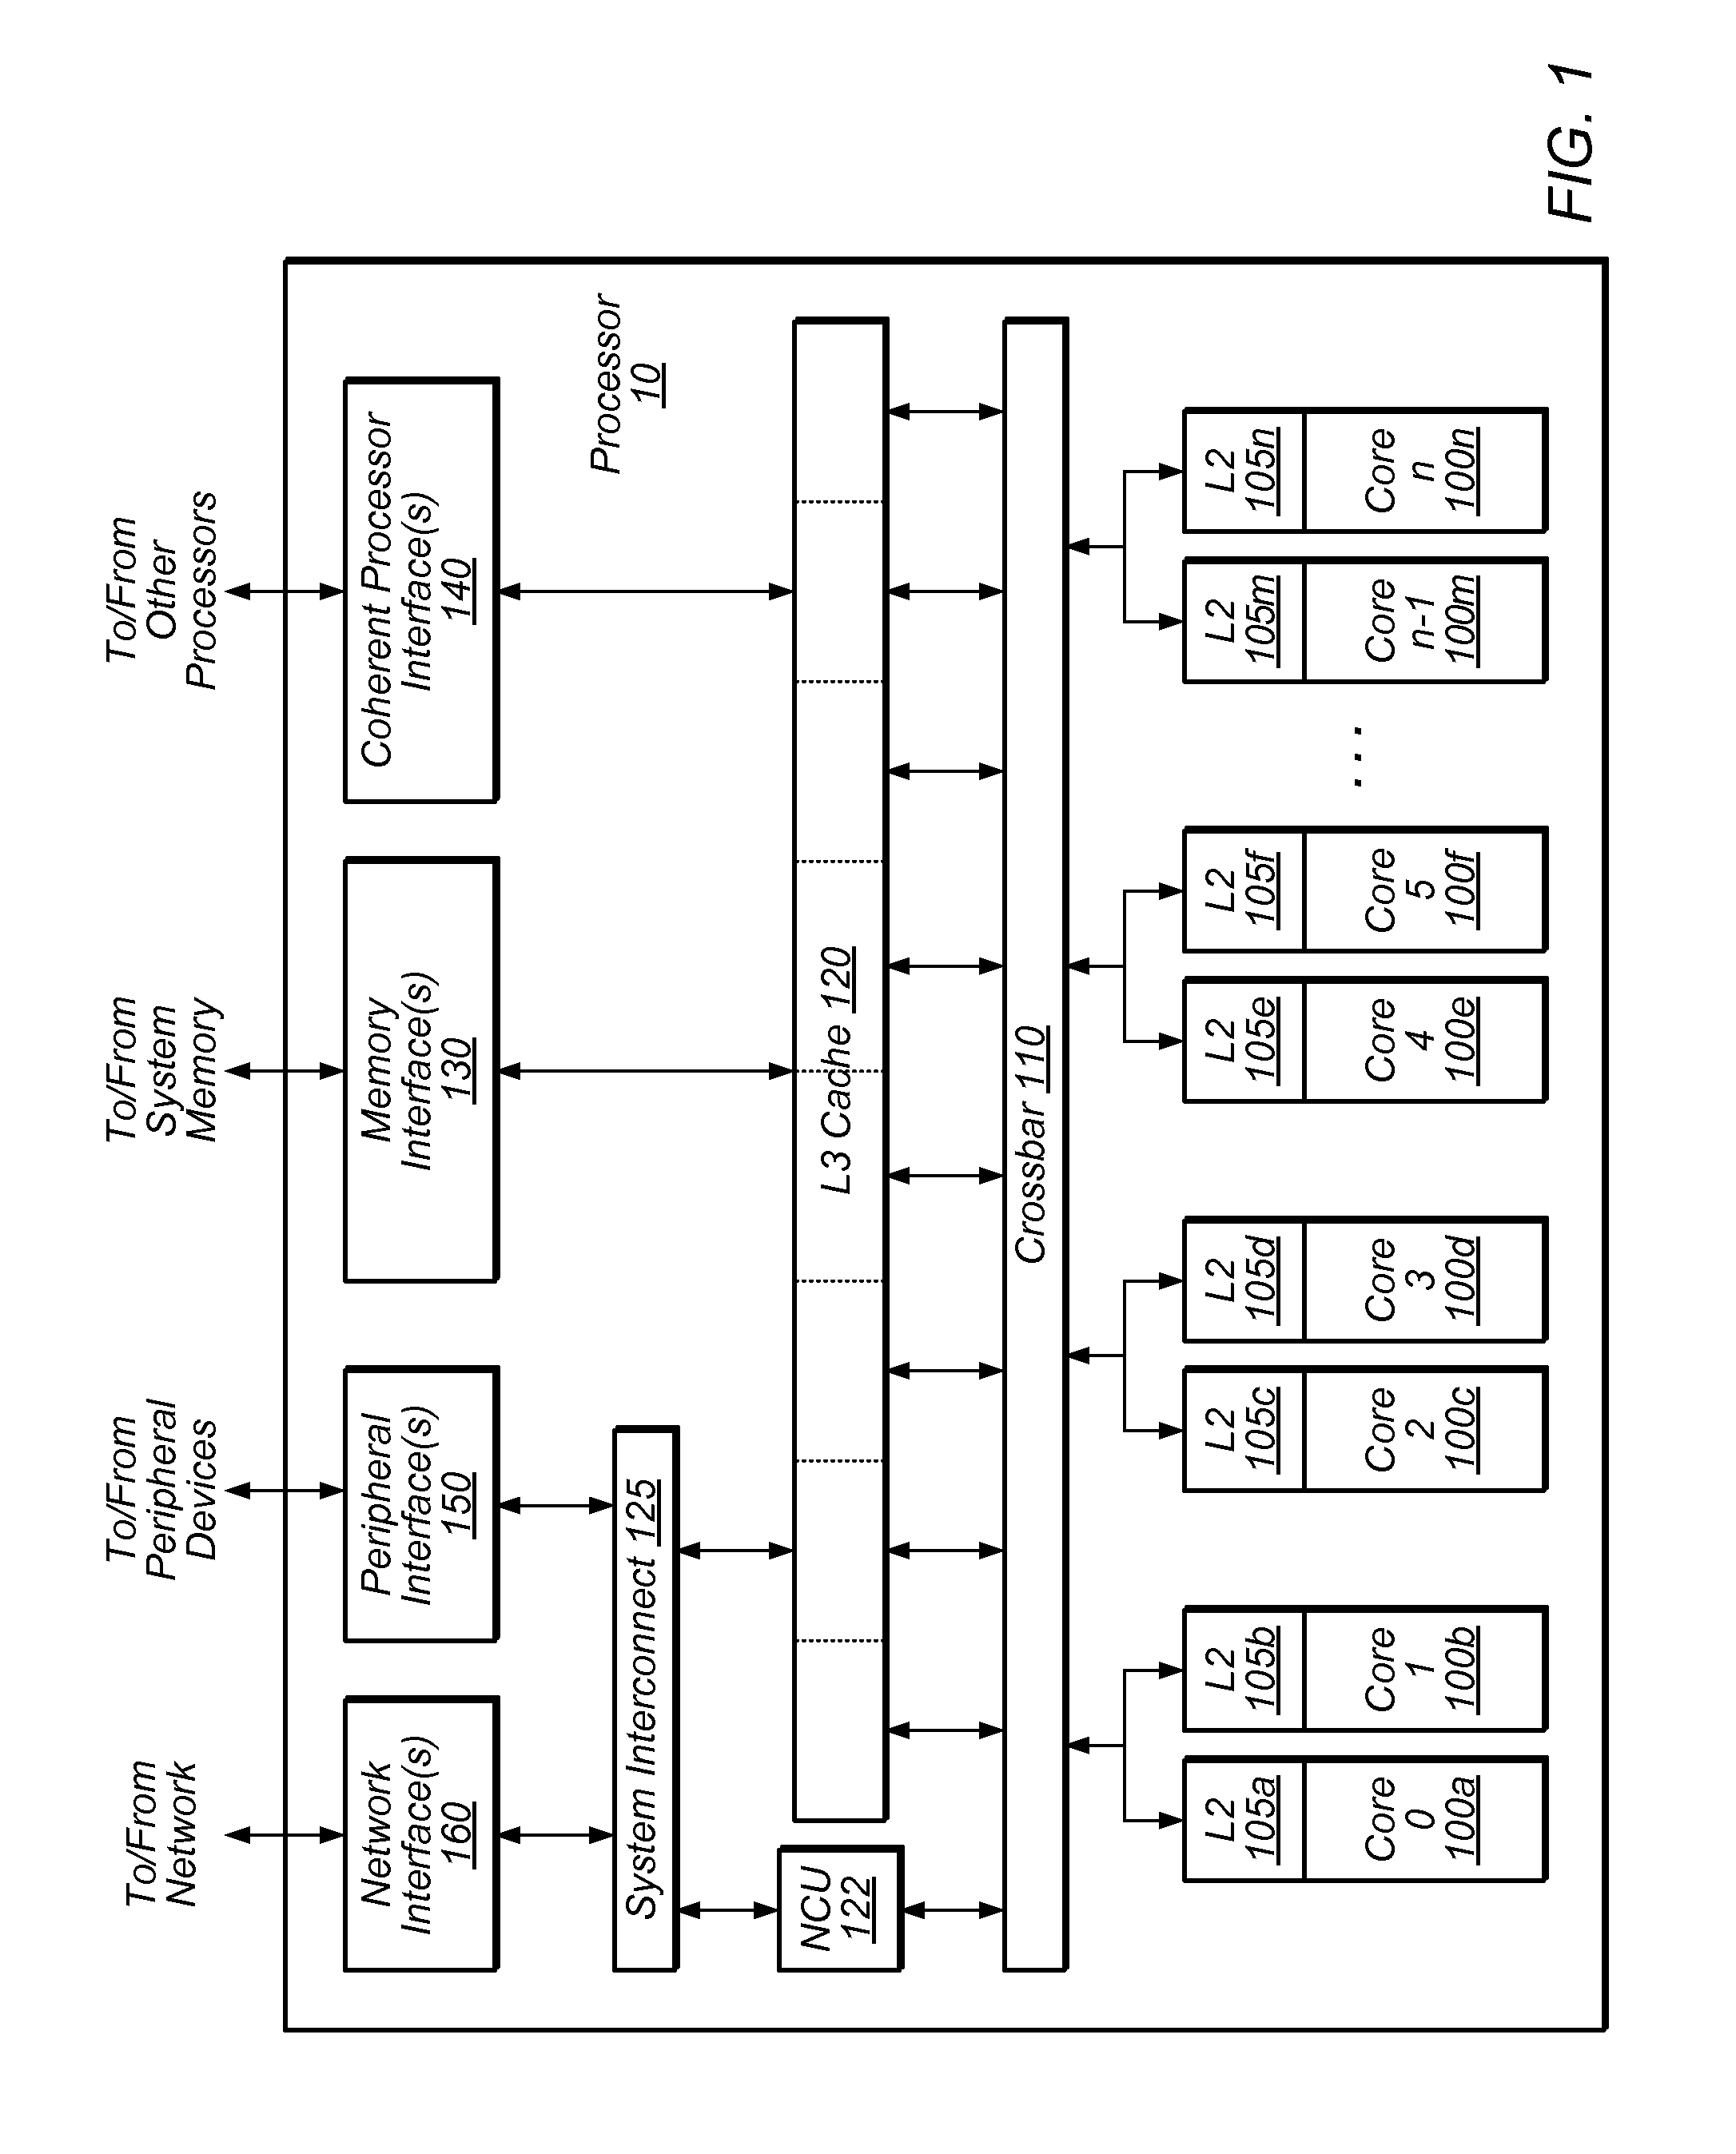 Suppression of control transfer instructions on incorrect speculative execution paths